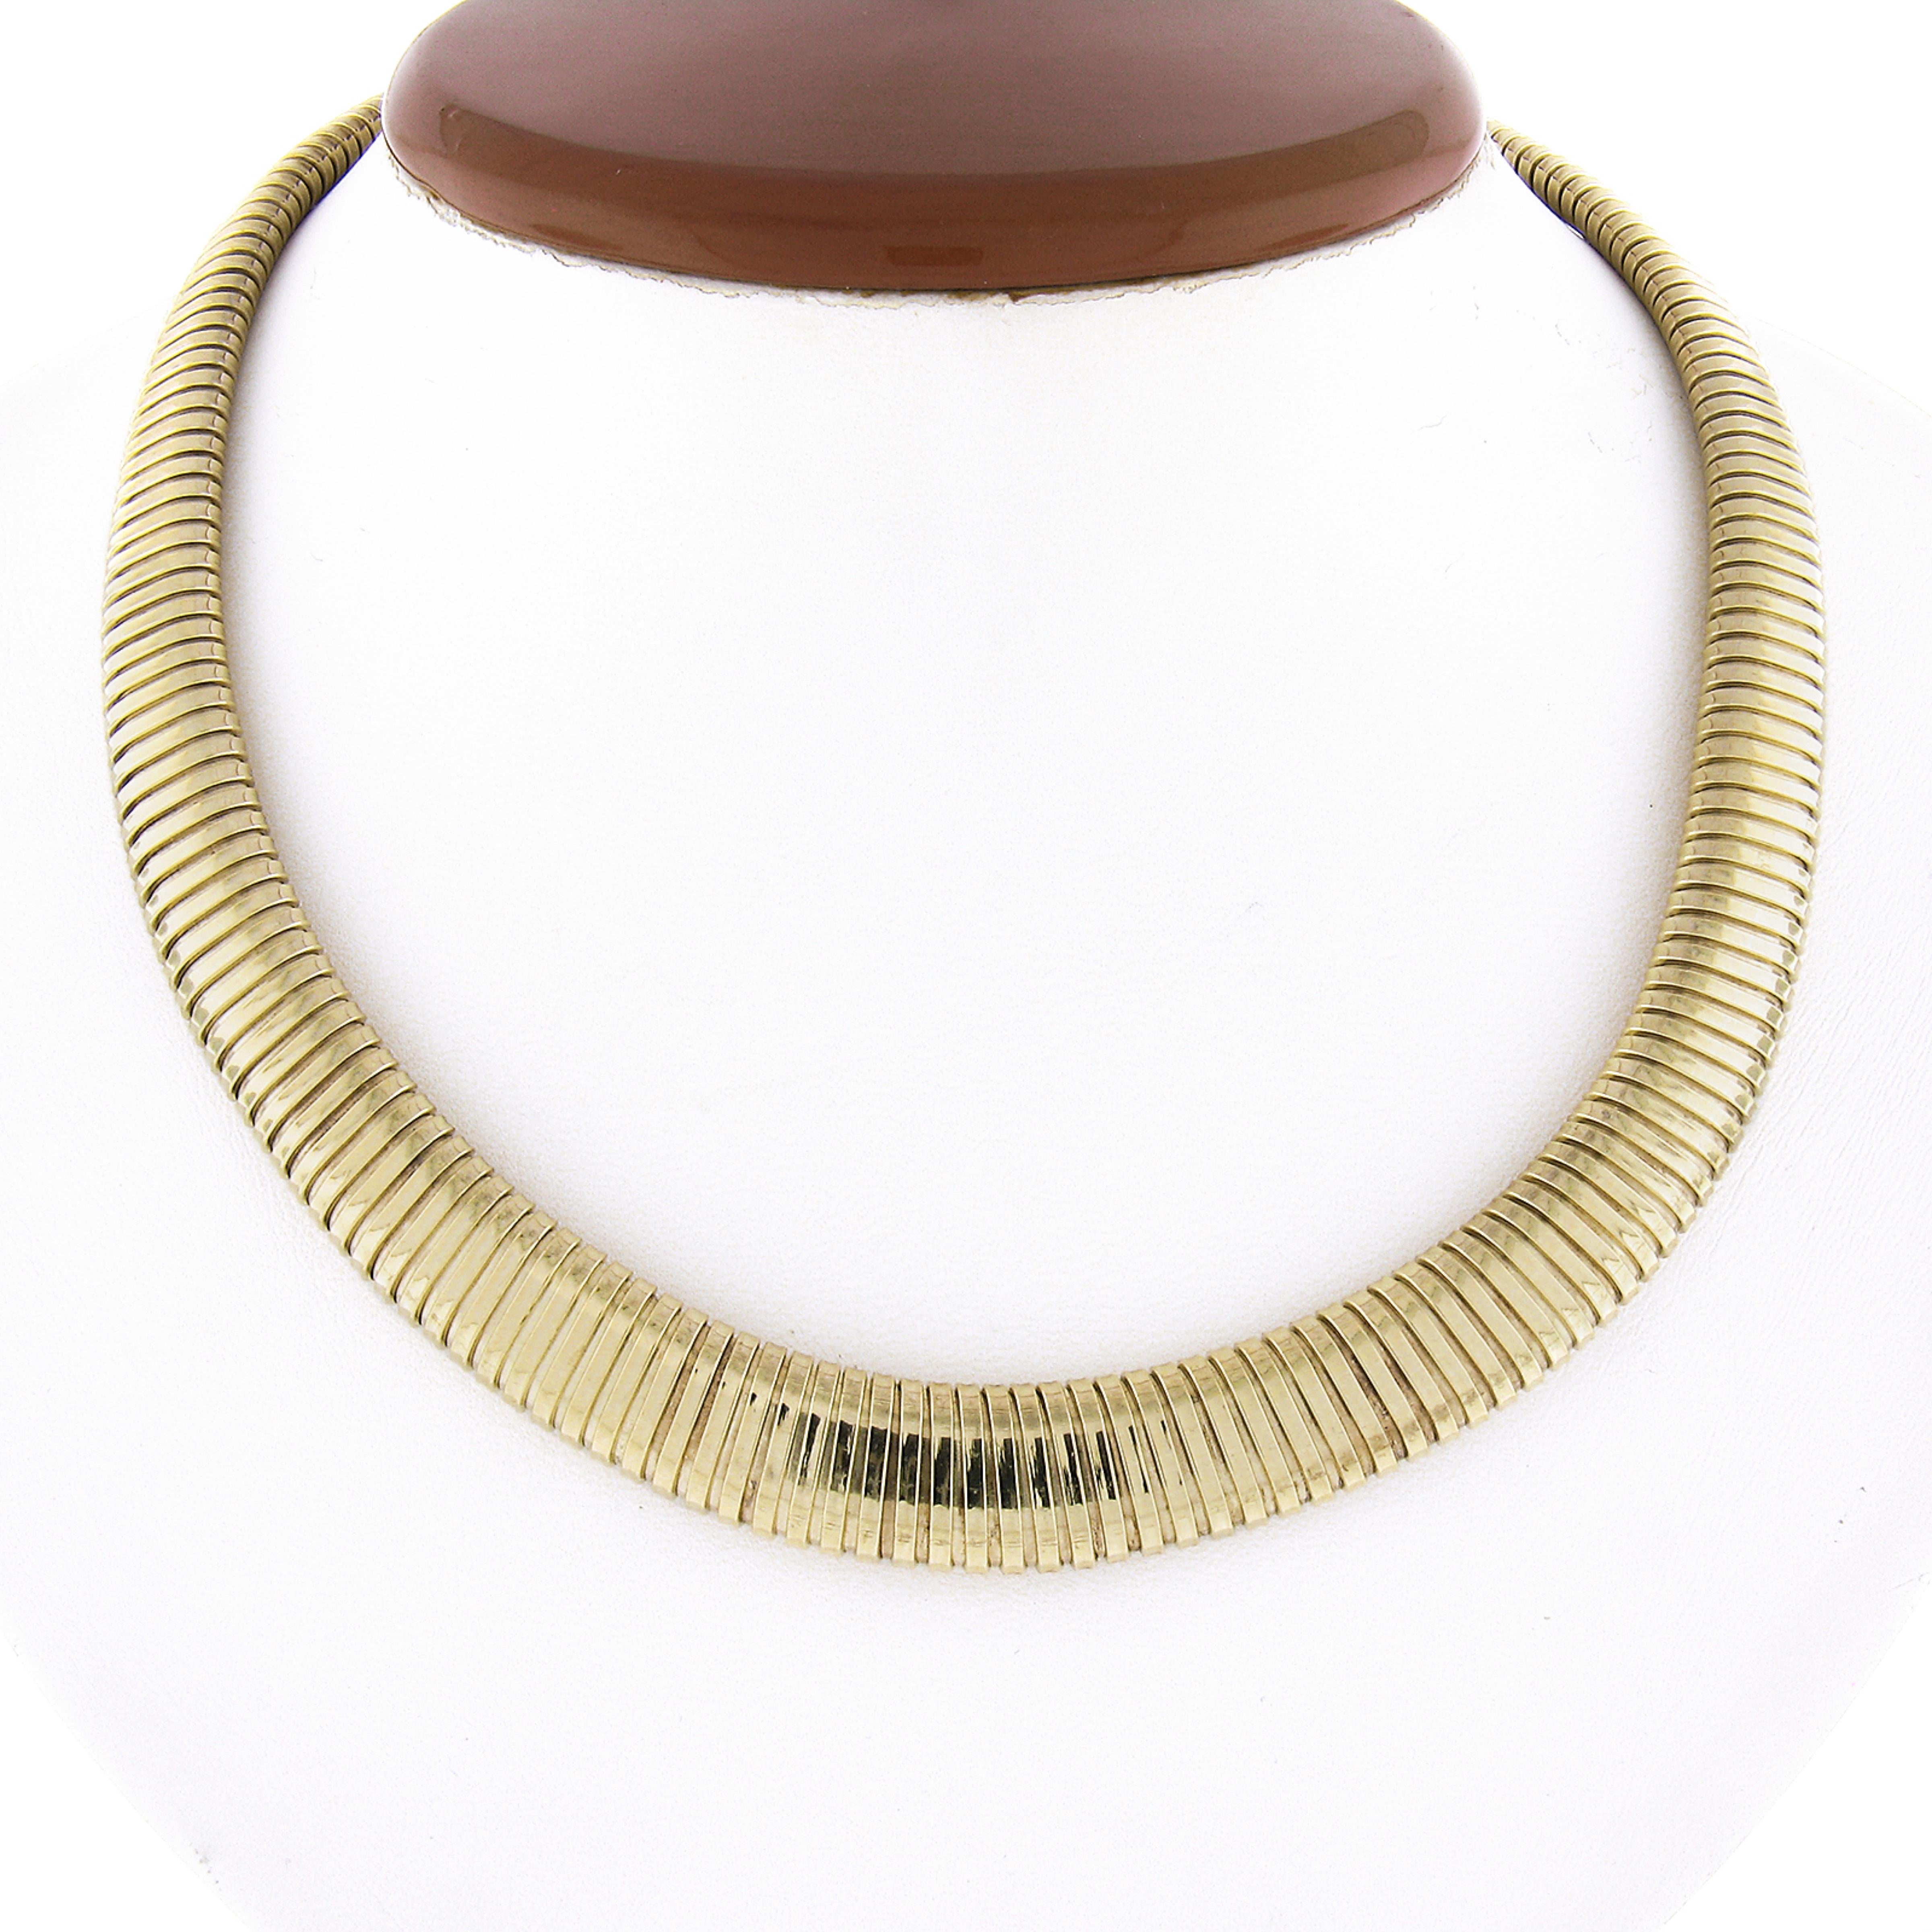 Here we have an Italian excellent condition, 16 inch polished accordion snake link chain necklace, which is graduated in width from 6.4mm to 12.1mm. The chain is solid 14k yellow gold and closes with a push clasp and safety latch. This necklace